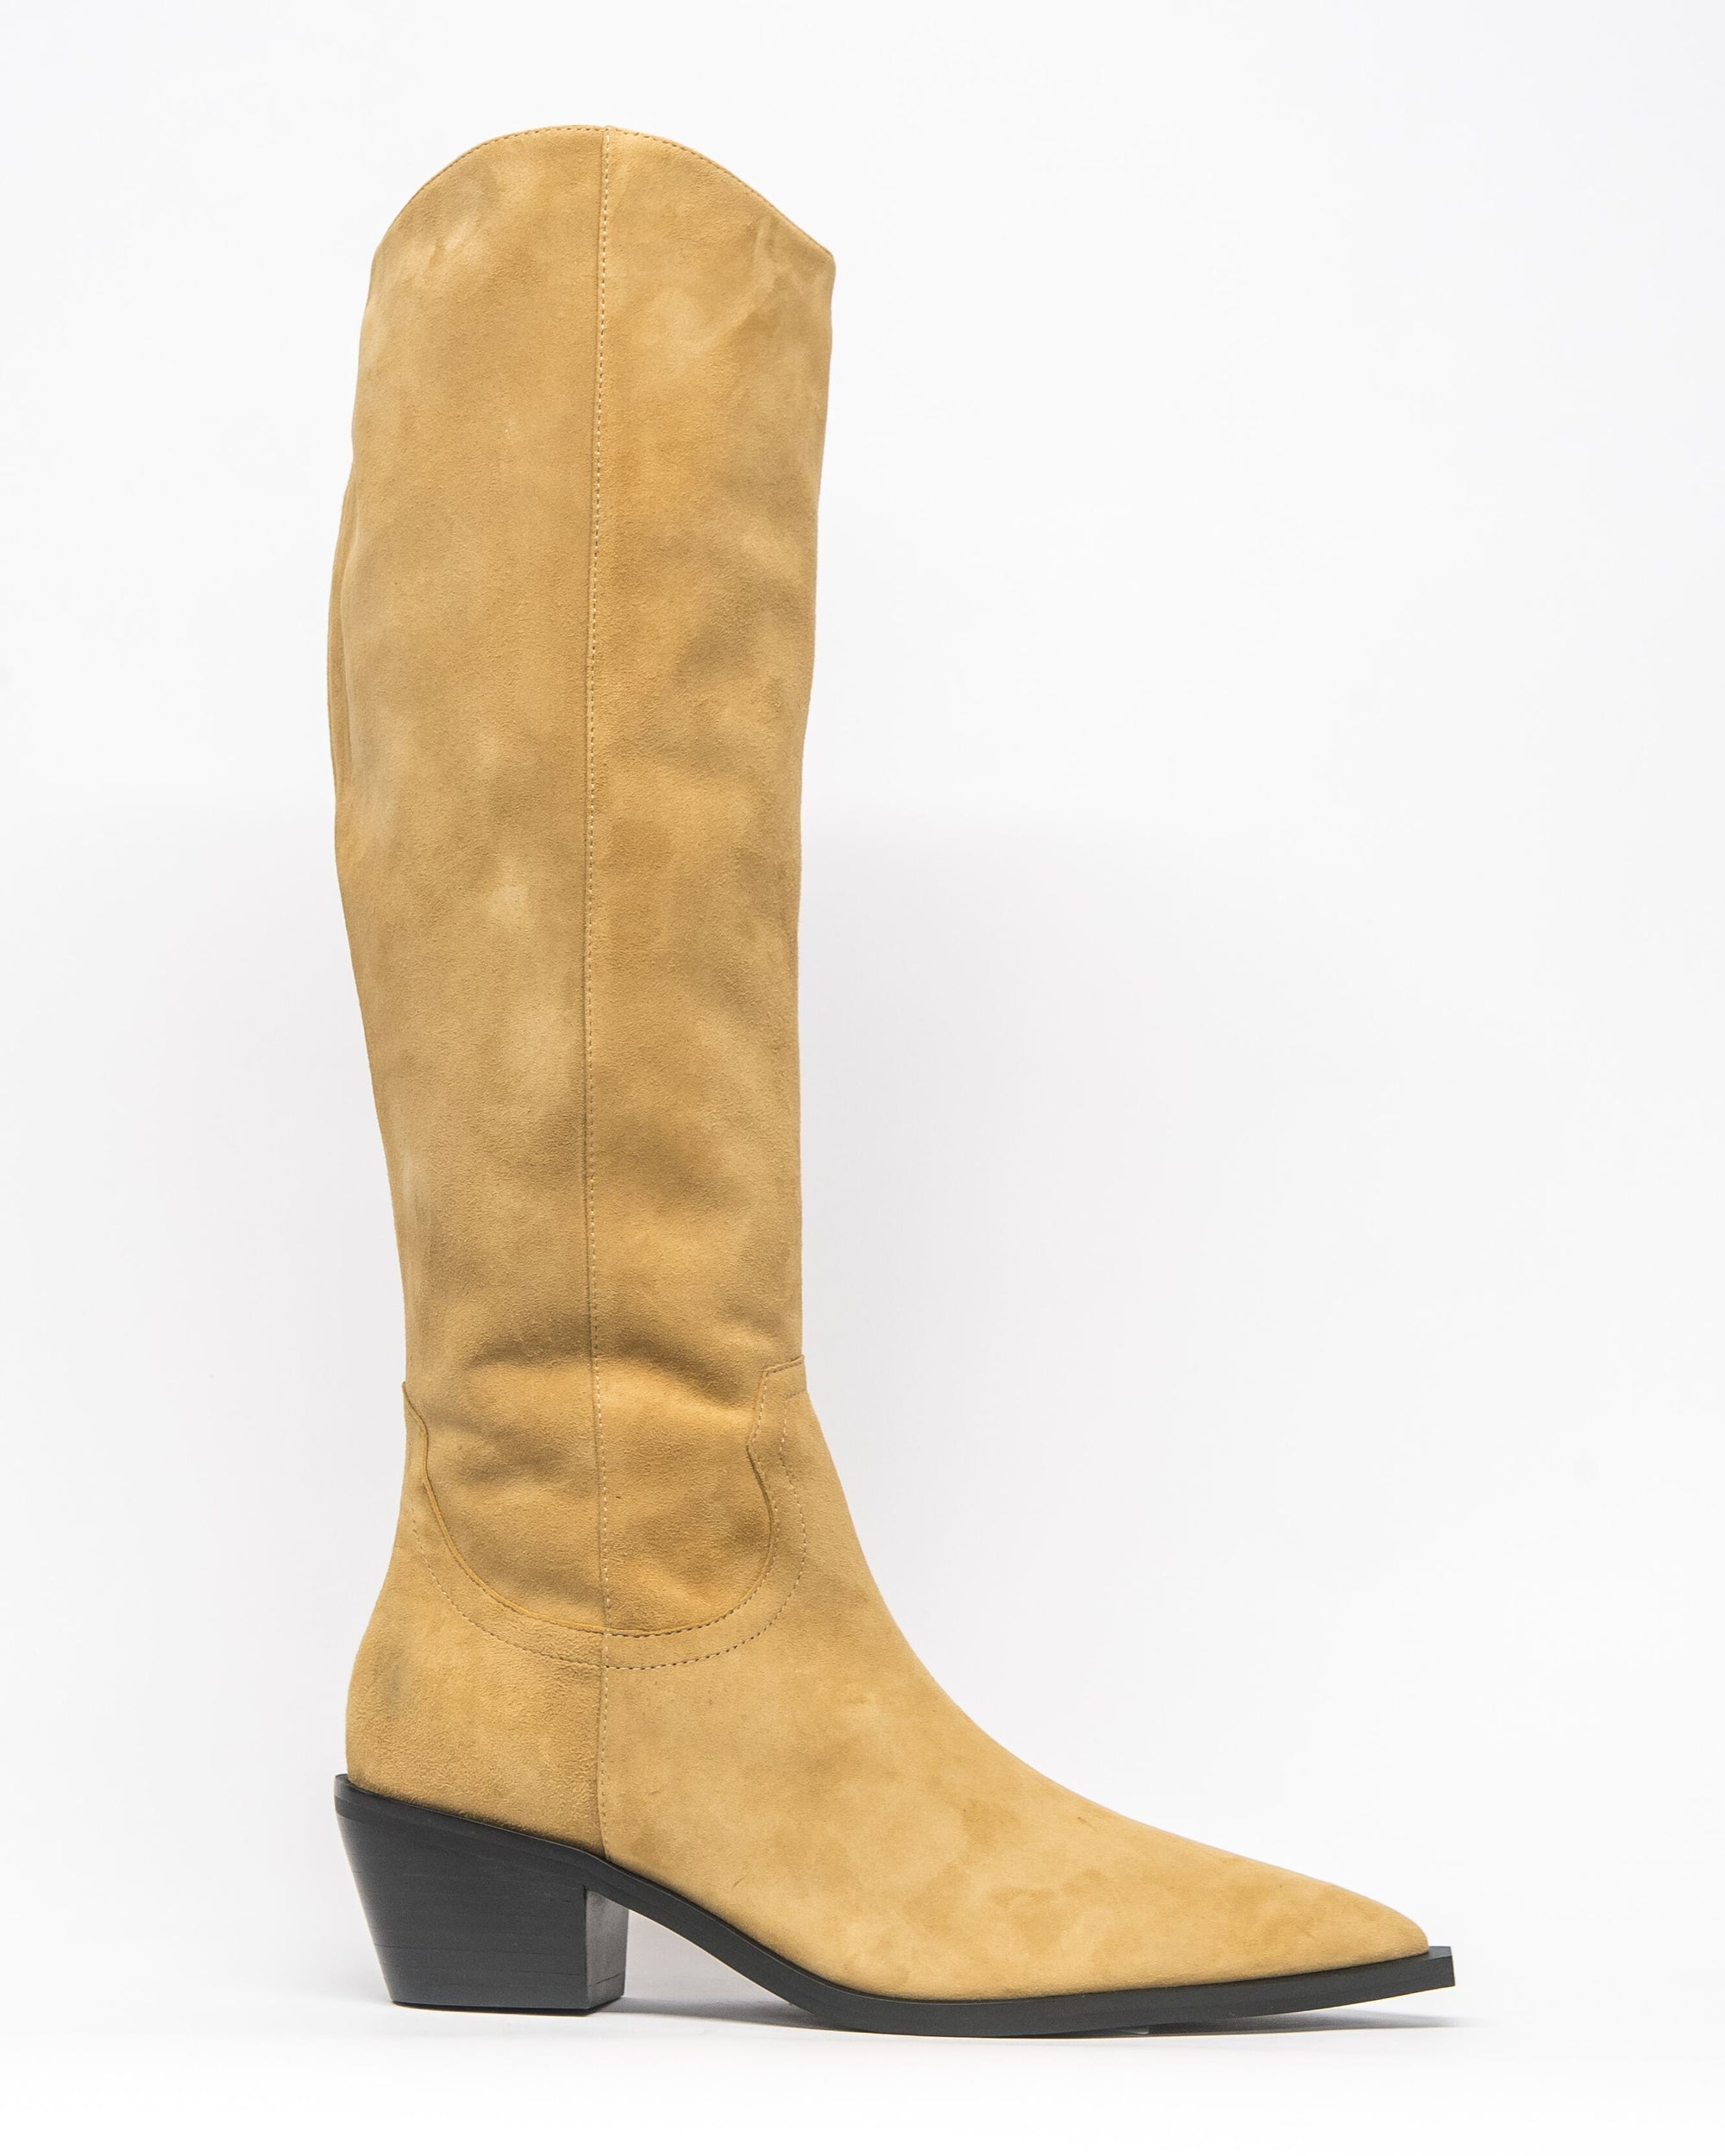 ratify boot - taupe suede